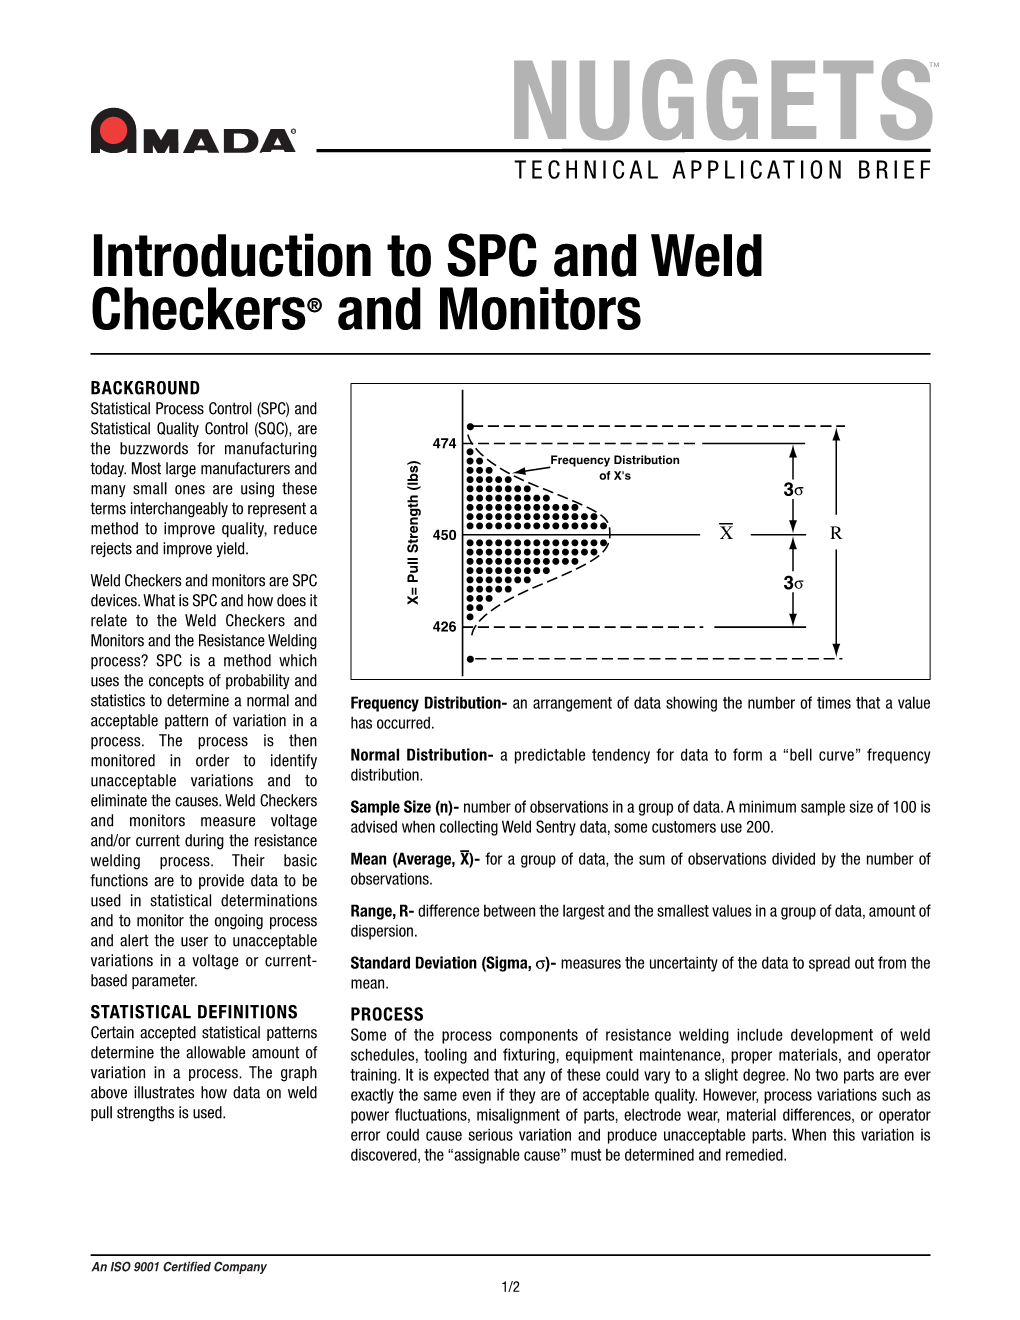 Introduction to SPC and Weld Checkers and Monitors